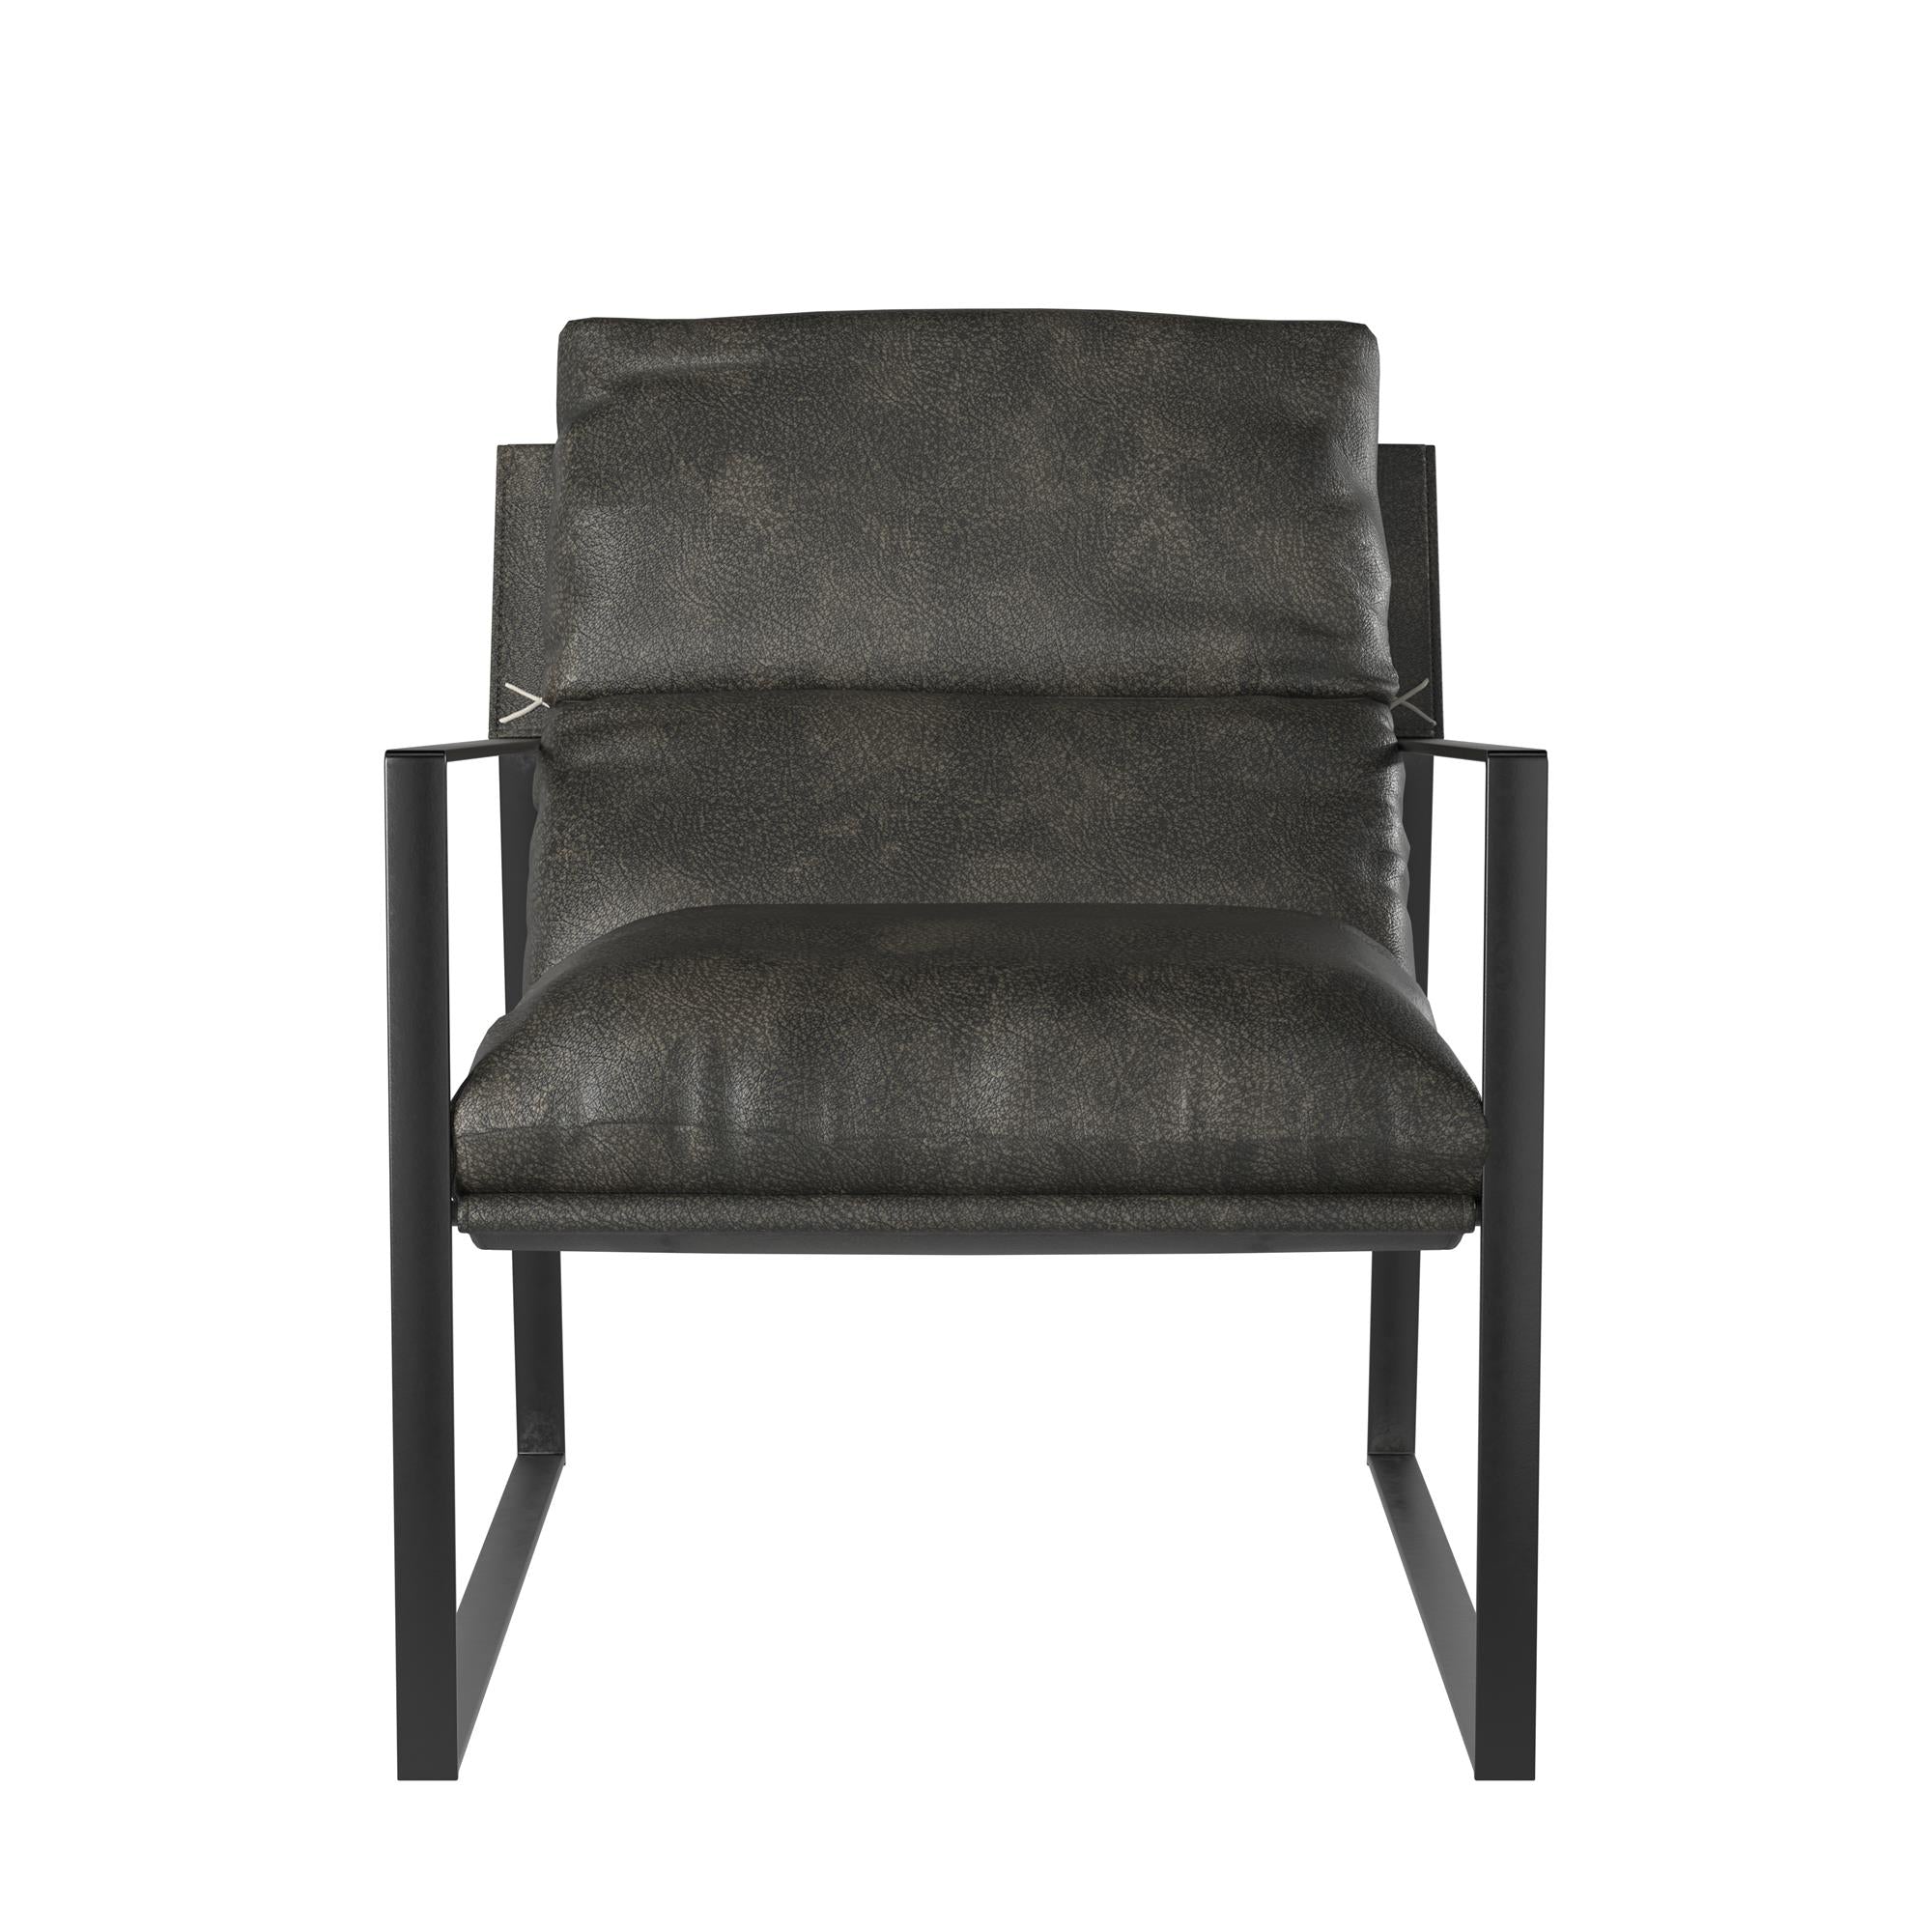  Varick Faux Leather Accent Chair - Espresso - N/A